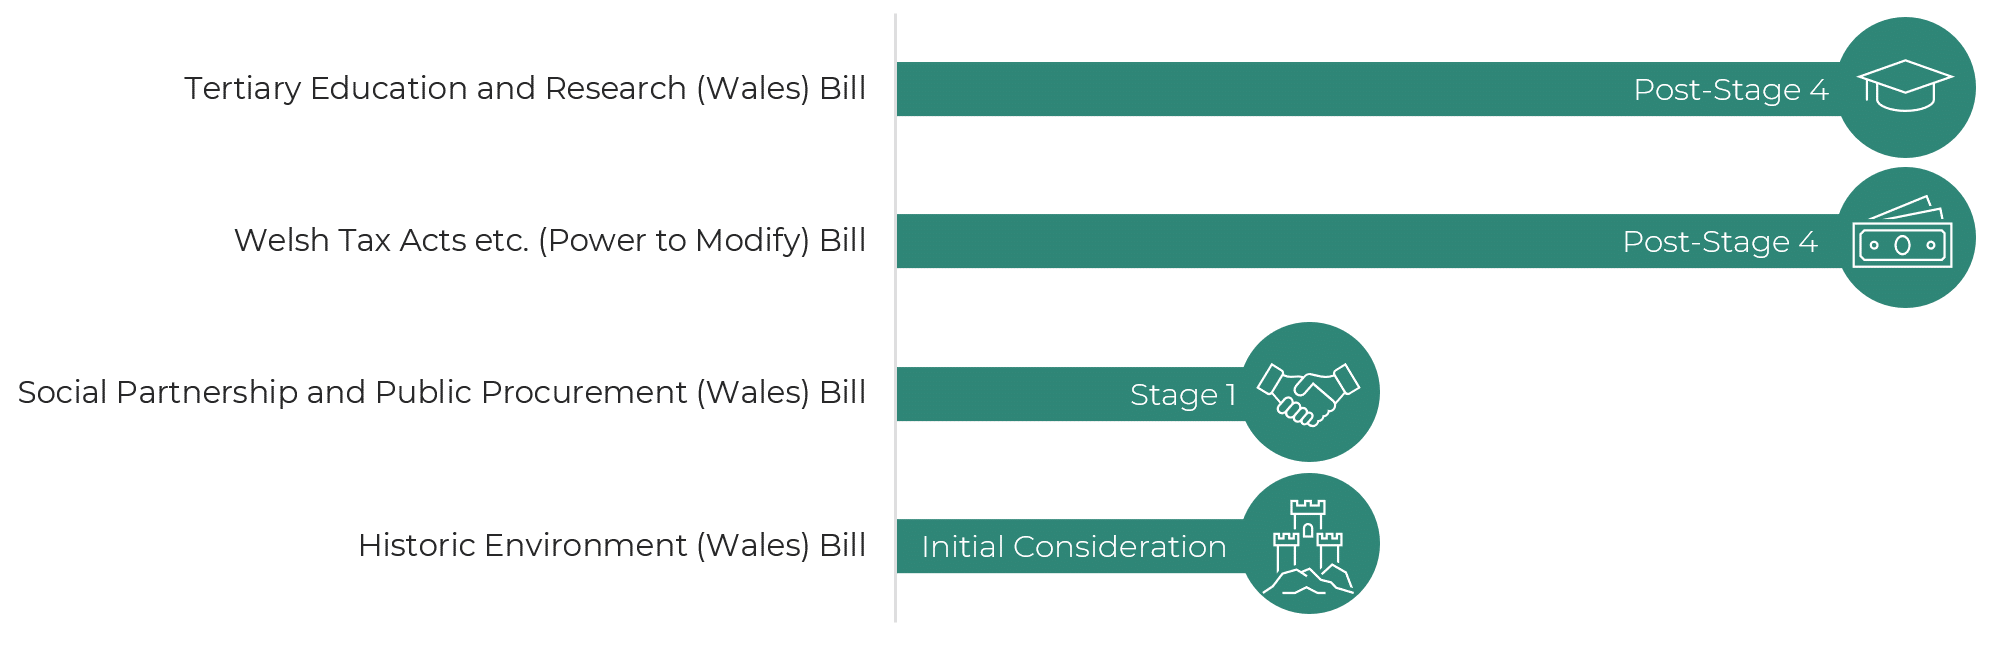 A chart showing the progress of the Bills currently being considered by the Senedd. The Tertiary Education and Research (Wales) Bill and the Welsh Tax Act etc. (Power to Modify) Bill are both at Post Stage 4, the Social Partnership and Public Procurement (Wales) Bill is at Stage 1 and the Historic Environment (Wales) Bill is at Initial Consideration stage.